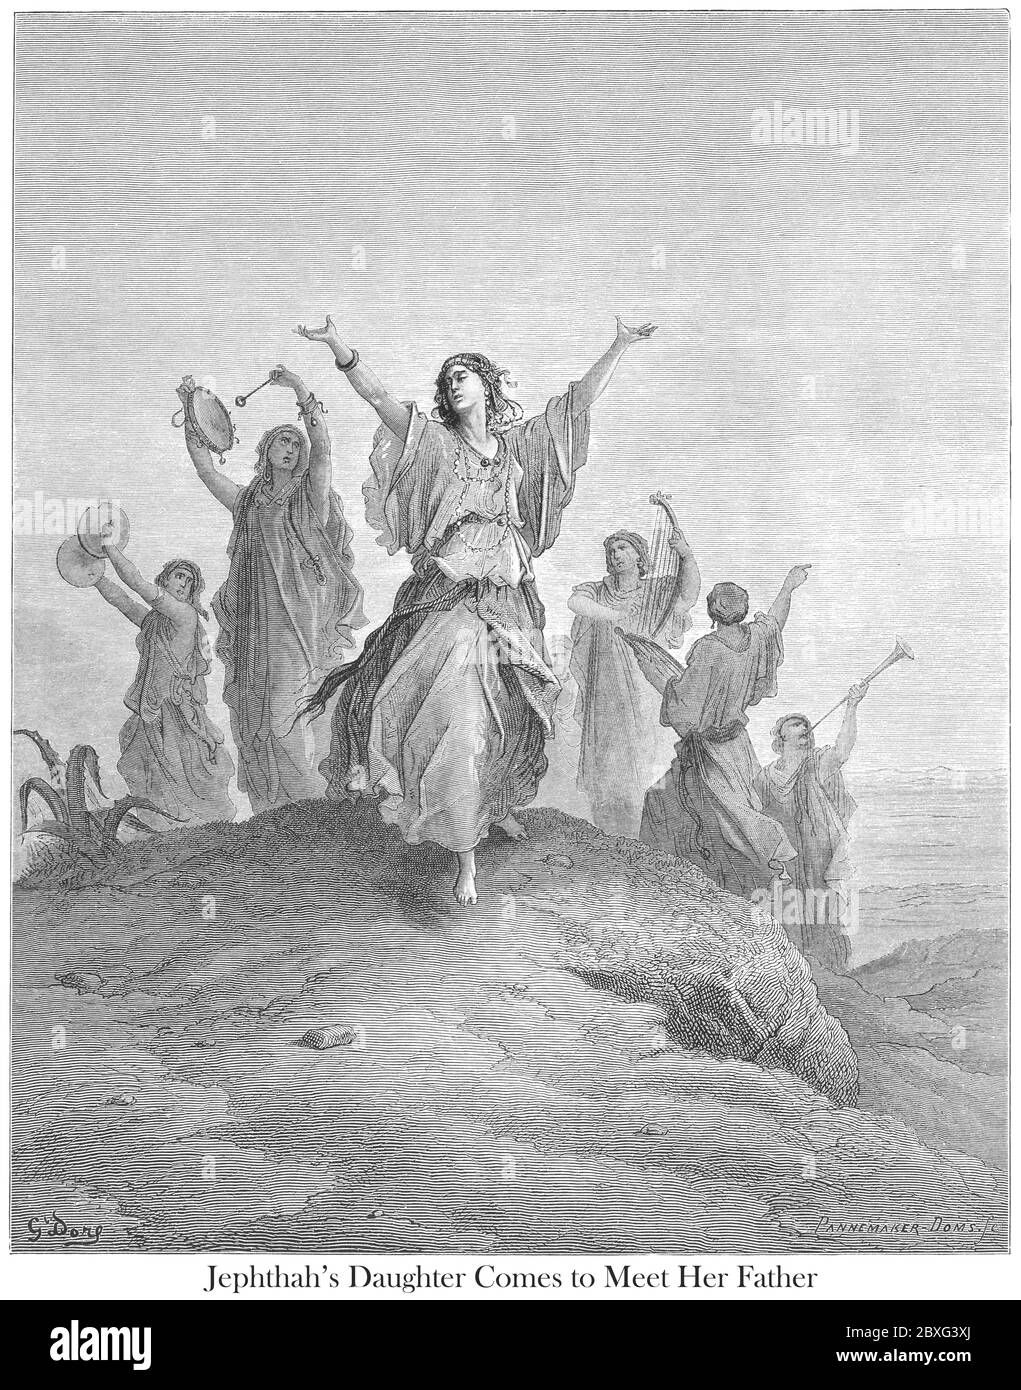 Jephthah's Daughter Coming to Meet Her Father Judges 11:34 From the book 'Bible Gallery' Illustrated by Gustave Dore with Memoir of Dore and Descriptive Letter-press by Talbot W. Chambers D.D. Published by Cassell & Company Limited in London and simultaneously by Mame in Tours, France in 1866 Stock Photo